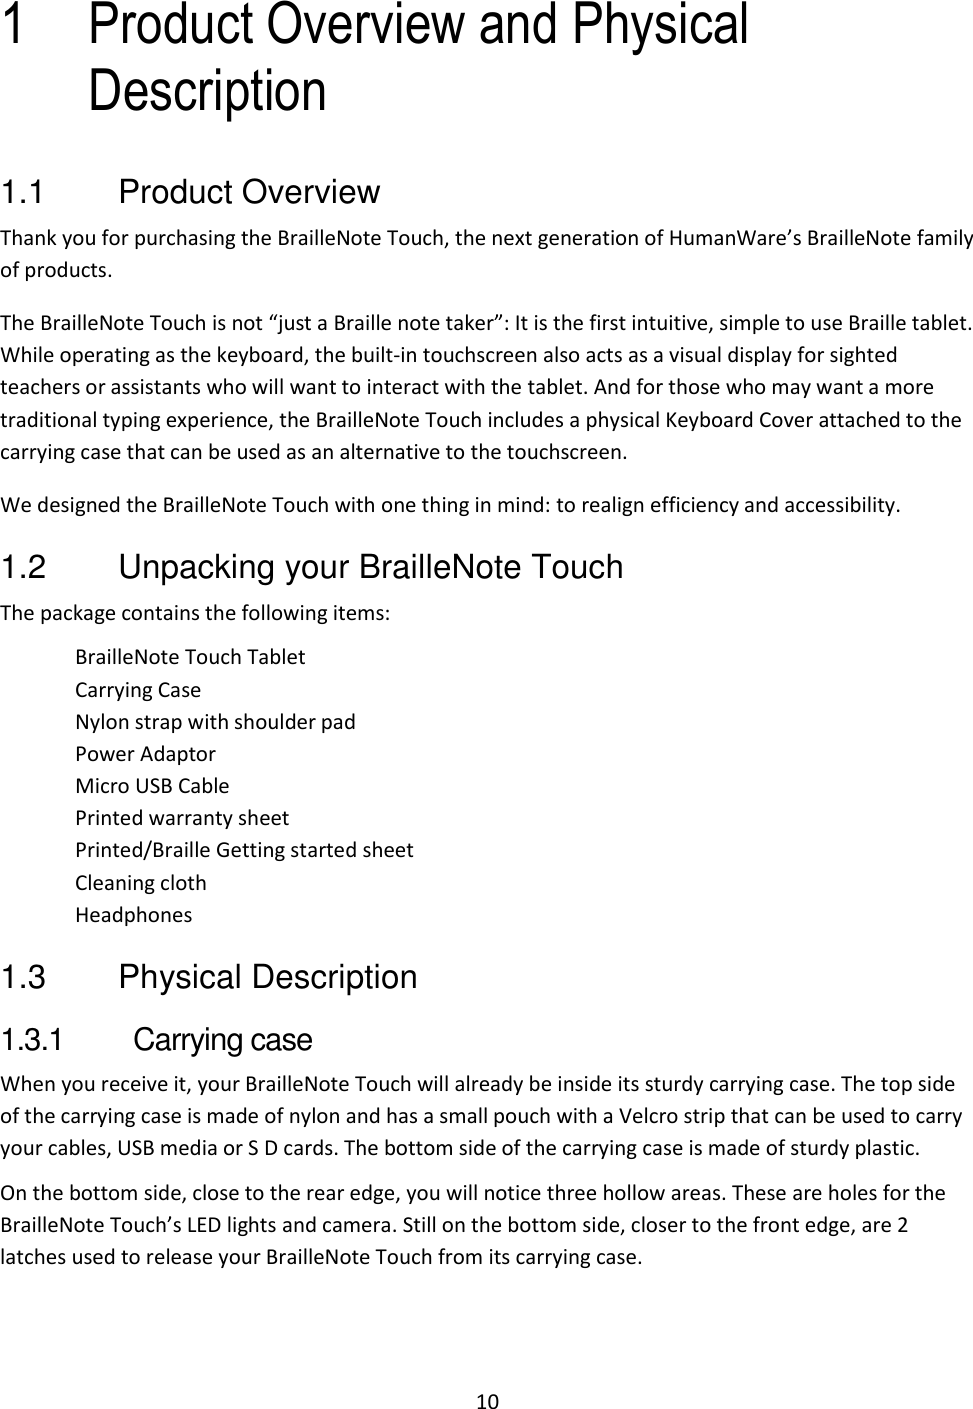 10 1 Product Overview and Physical Description 1.1  Product Overview Thank you for purchasing the BrailleNote Touch, the next generation of HumanWare’s BrailleNote family of products. The BrailleNote Touch is not “just a Braille note taker”: It is the first intuitive, simple to use Braille tablet. While operating as the keyboard, the built-in touchscreen also acts as a visual display for sighted teachers or assistants who will want to interact with the tablet. And for those who may want a more traditional typing experience, the BrailleNote Touch includes a physical Keyboard Cover attached to the carrying case that can be used as an alternative to the touchscreen. We designed the BrailleNote Touch with one thing in mind: to realign efficiency and accessibility.  1.2  Unpacking your BrailleNote Touch The package contains the following items: BrailleNote Touch Tablet Carrying Case Nylon strap with shoulder pad Power Adaptor Micro USB Cable Printed warranty sheet Printed/Braille Getting started sheet Cleaning cloth Headphones 1.3  Physical Description 1.3.1  Carrying case When you receive it, your BrailleNote Touch will already be inside its sturdy carrying case. The top side of the carrying case is made of nylon and has a small pouch with a Velcro strip that can be used to carry your cables, USB media or S D cards. The bottom side of the carrying case is made of sturdy plastic.  On the bottom side, close to the rear edge, you will notice three hollow areas. These are holes for the BrailleNote Touch’s LED lights and camera. Still on the bottom side, closer to the front edge, are 2 latches used to release your BrailleNote Touch from its carrying case.  